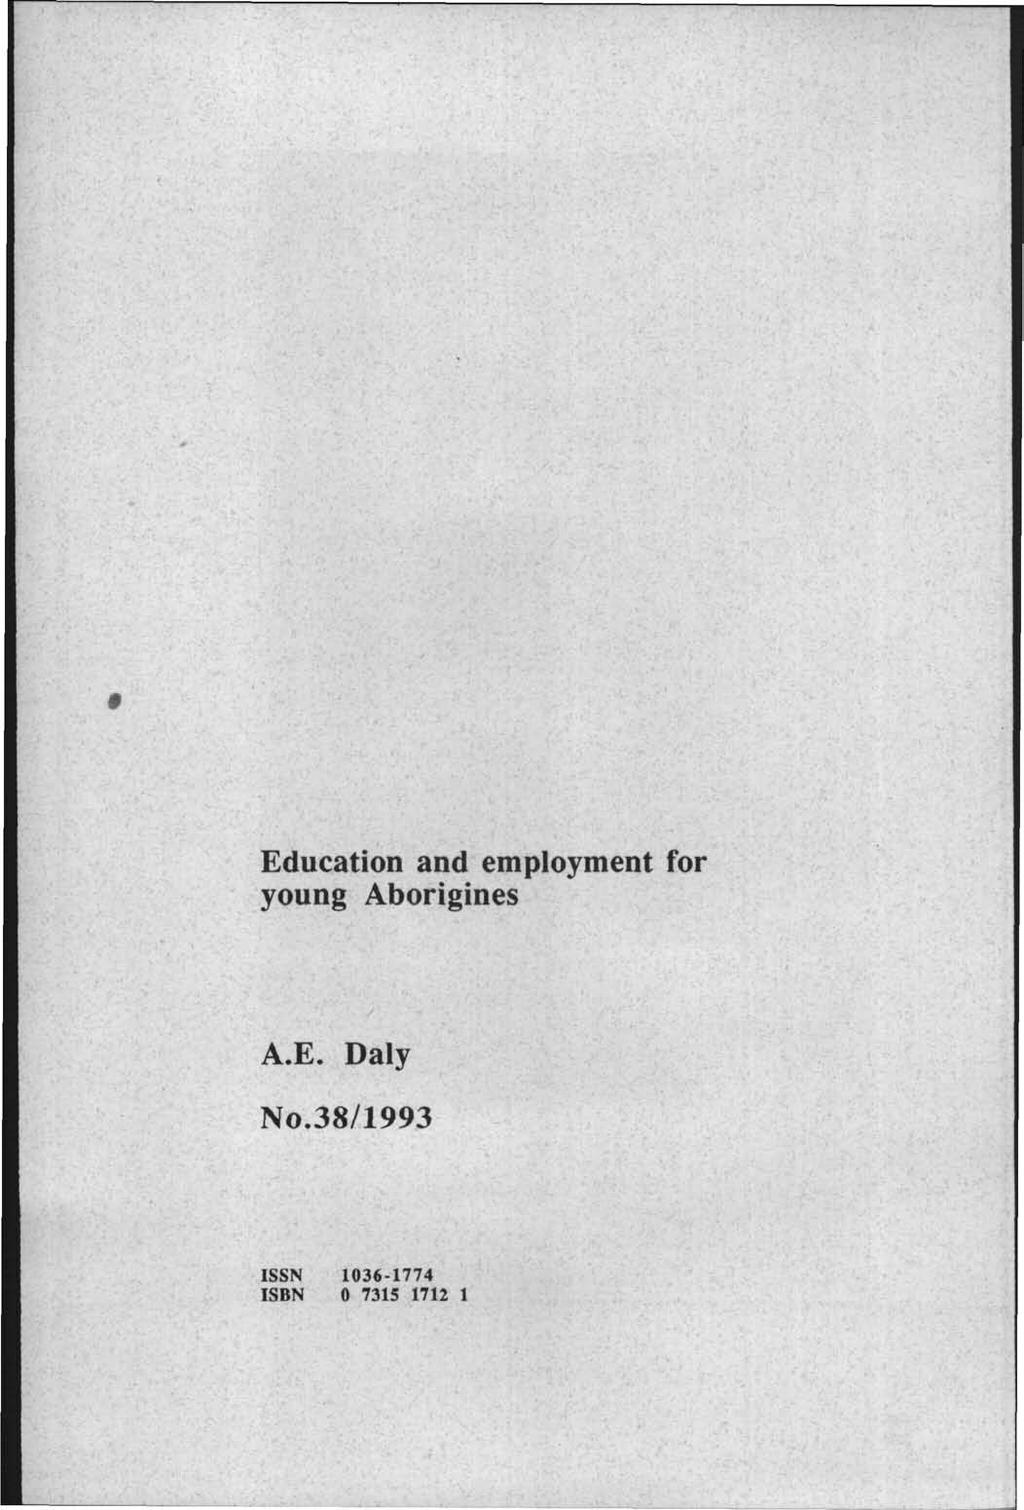 Education and employment for young Aborigines A.E. Daly No.